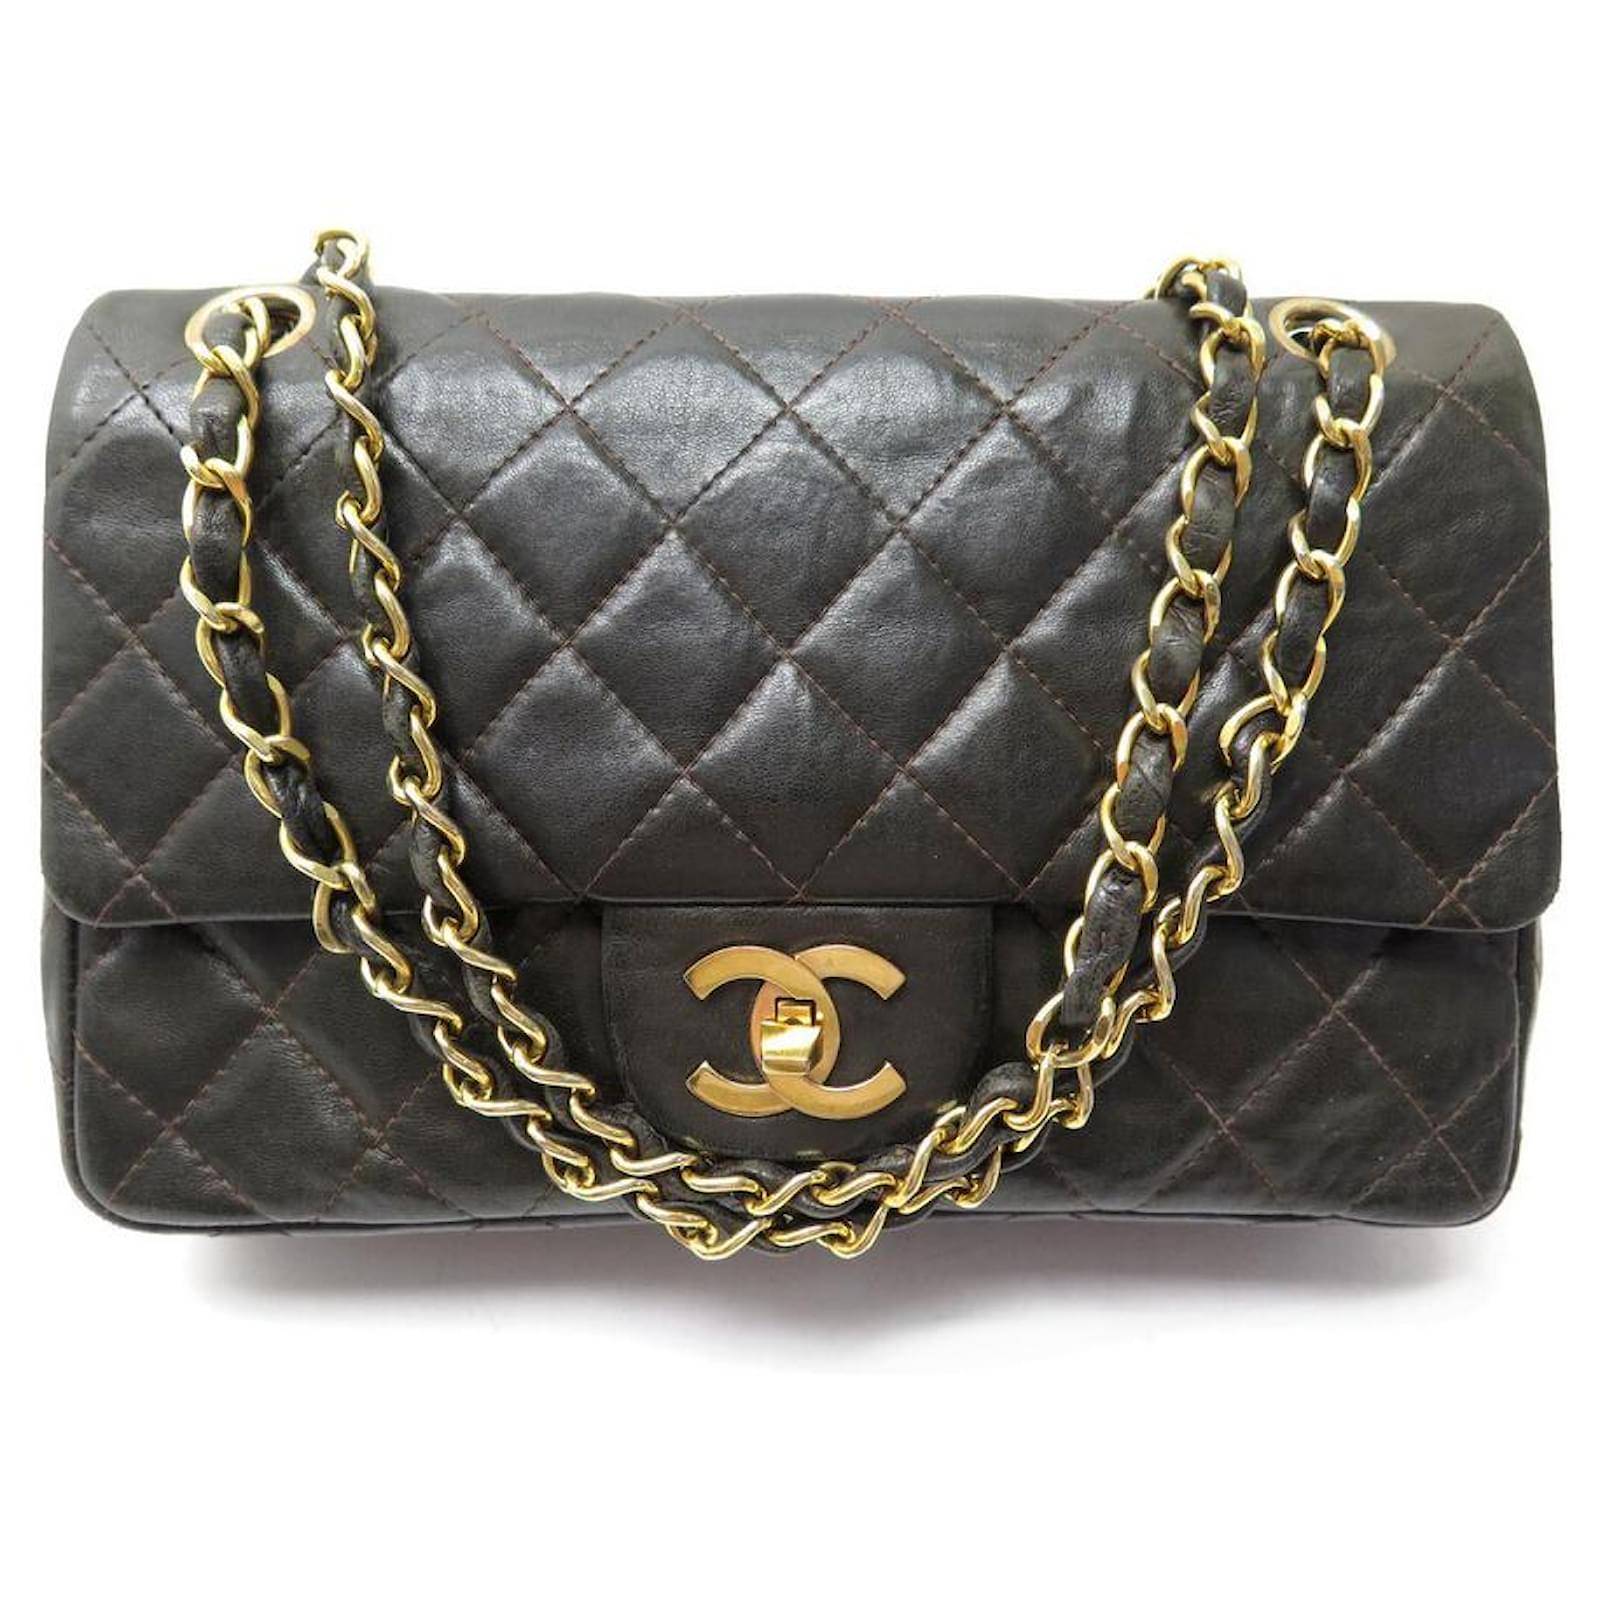 VINTAGE CHANEL CLASSIC TIMELESS PM HANDBAG BROWN QUILTED LEATHER BAG